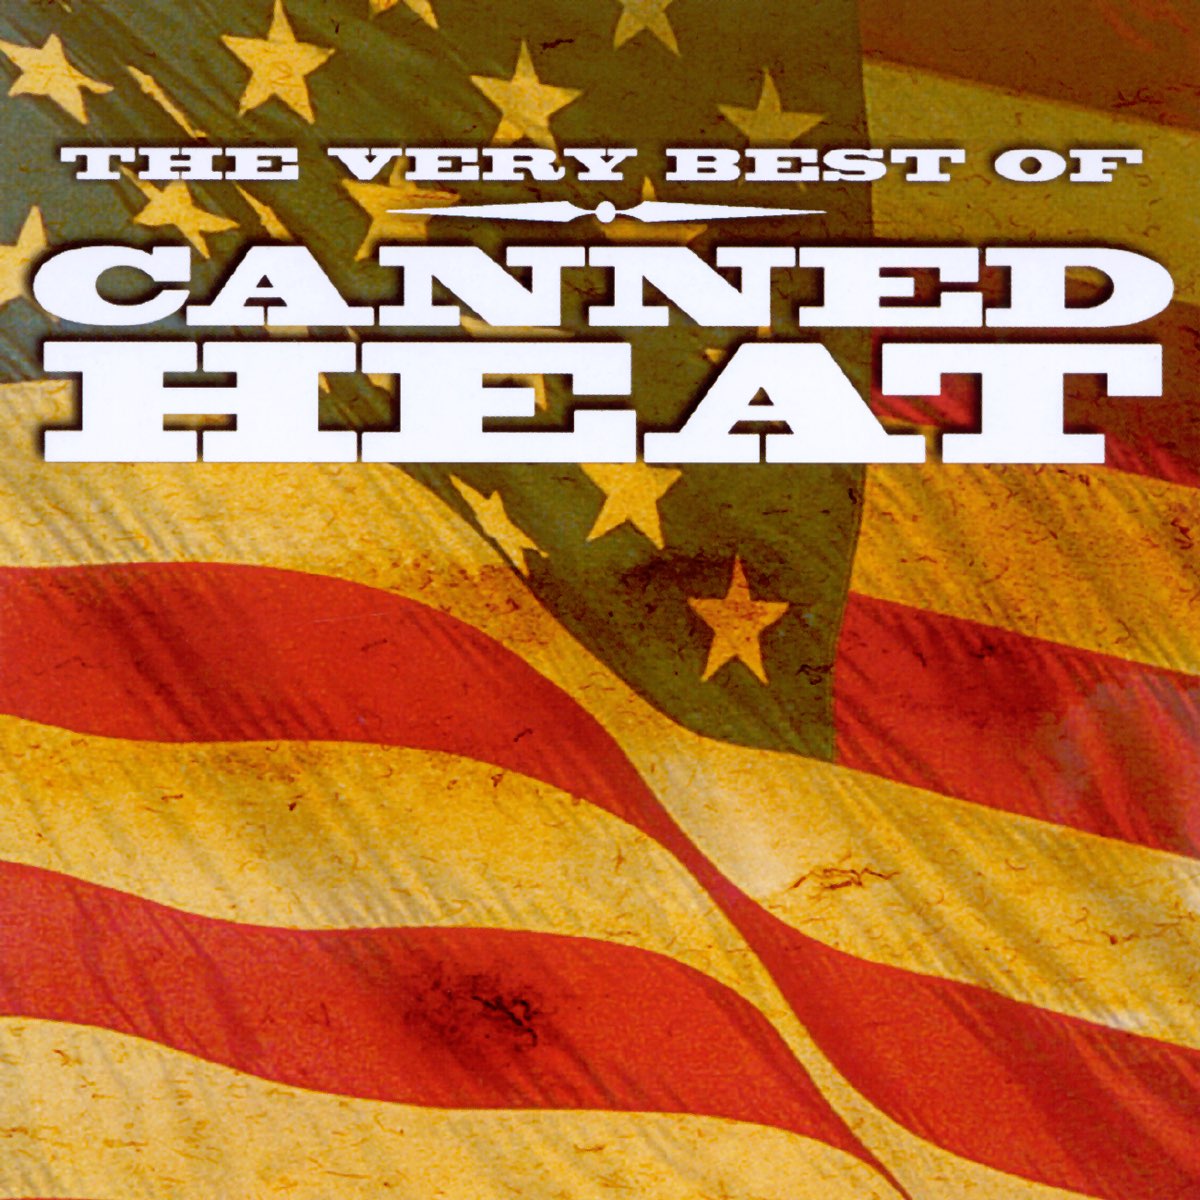 Canned heat steam фото 47